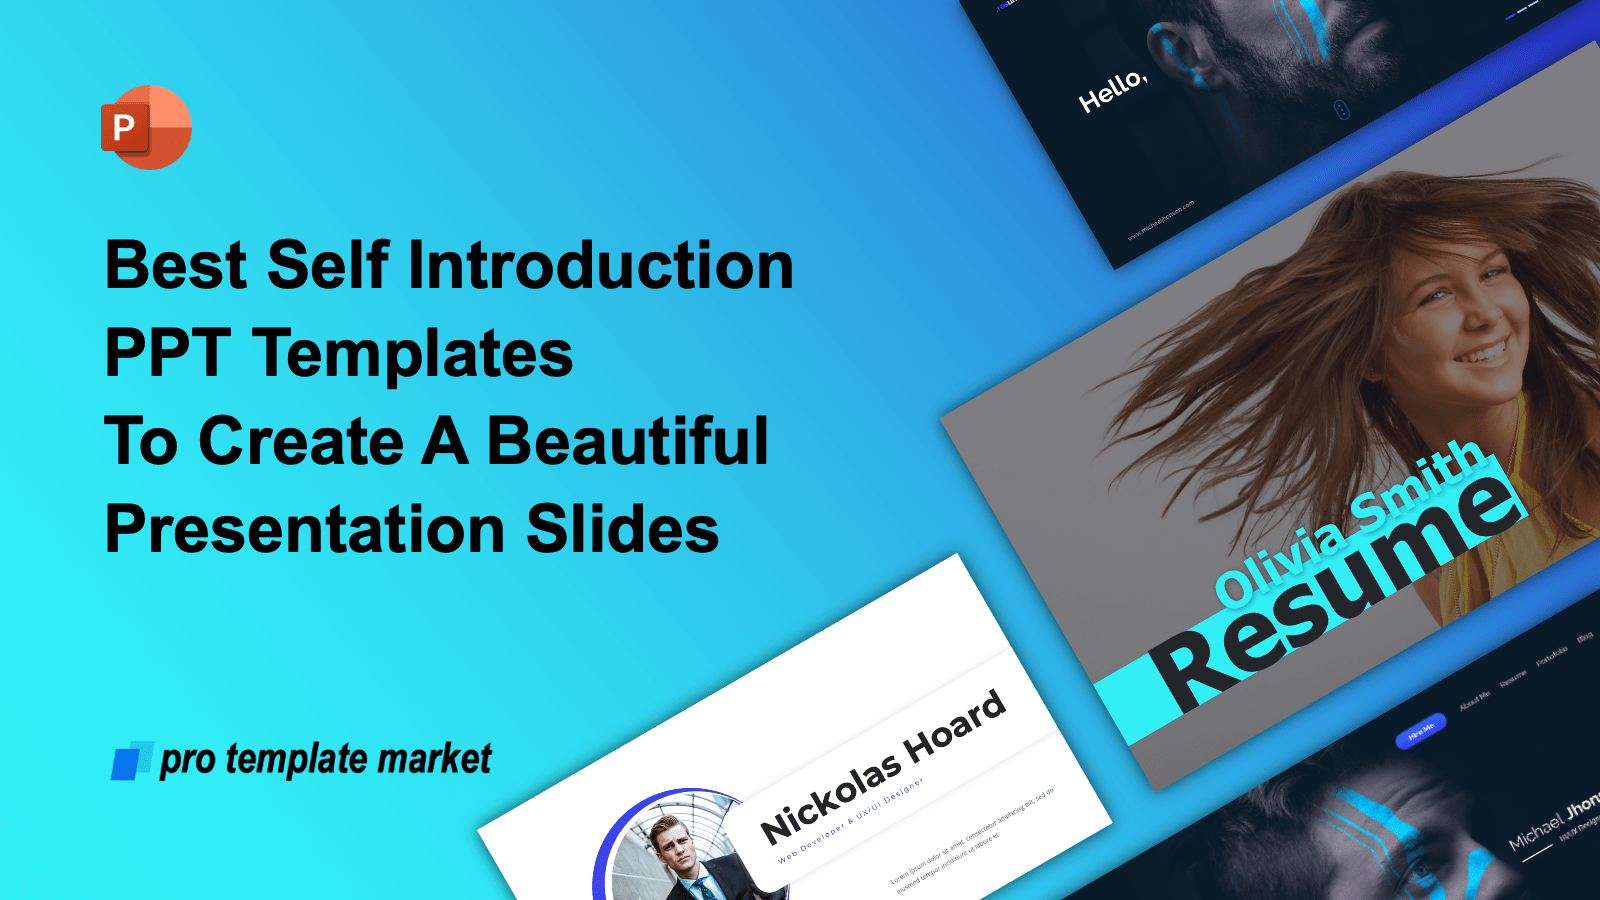 11 Best Self Introduction PPT Templates To Create A Beautiful Presentation Slides in 2021